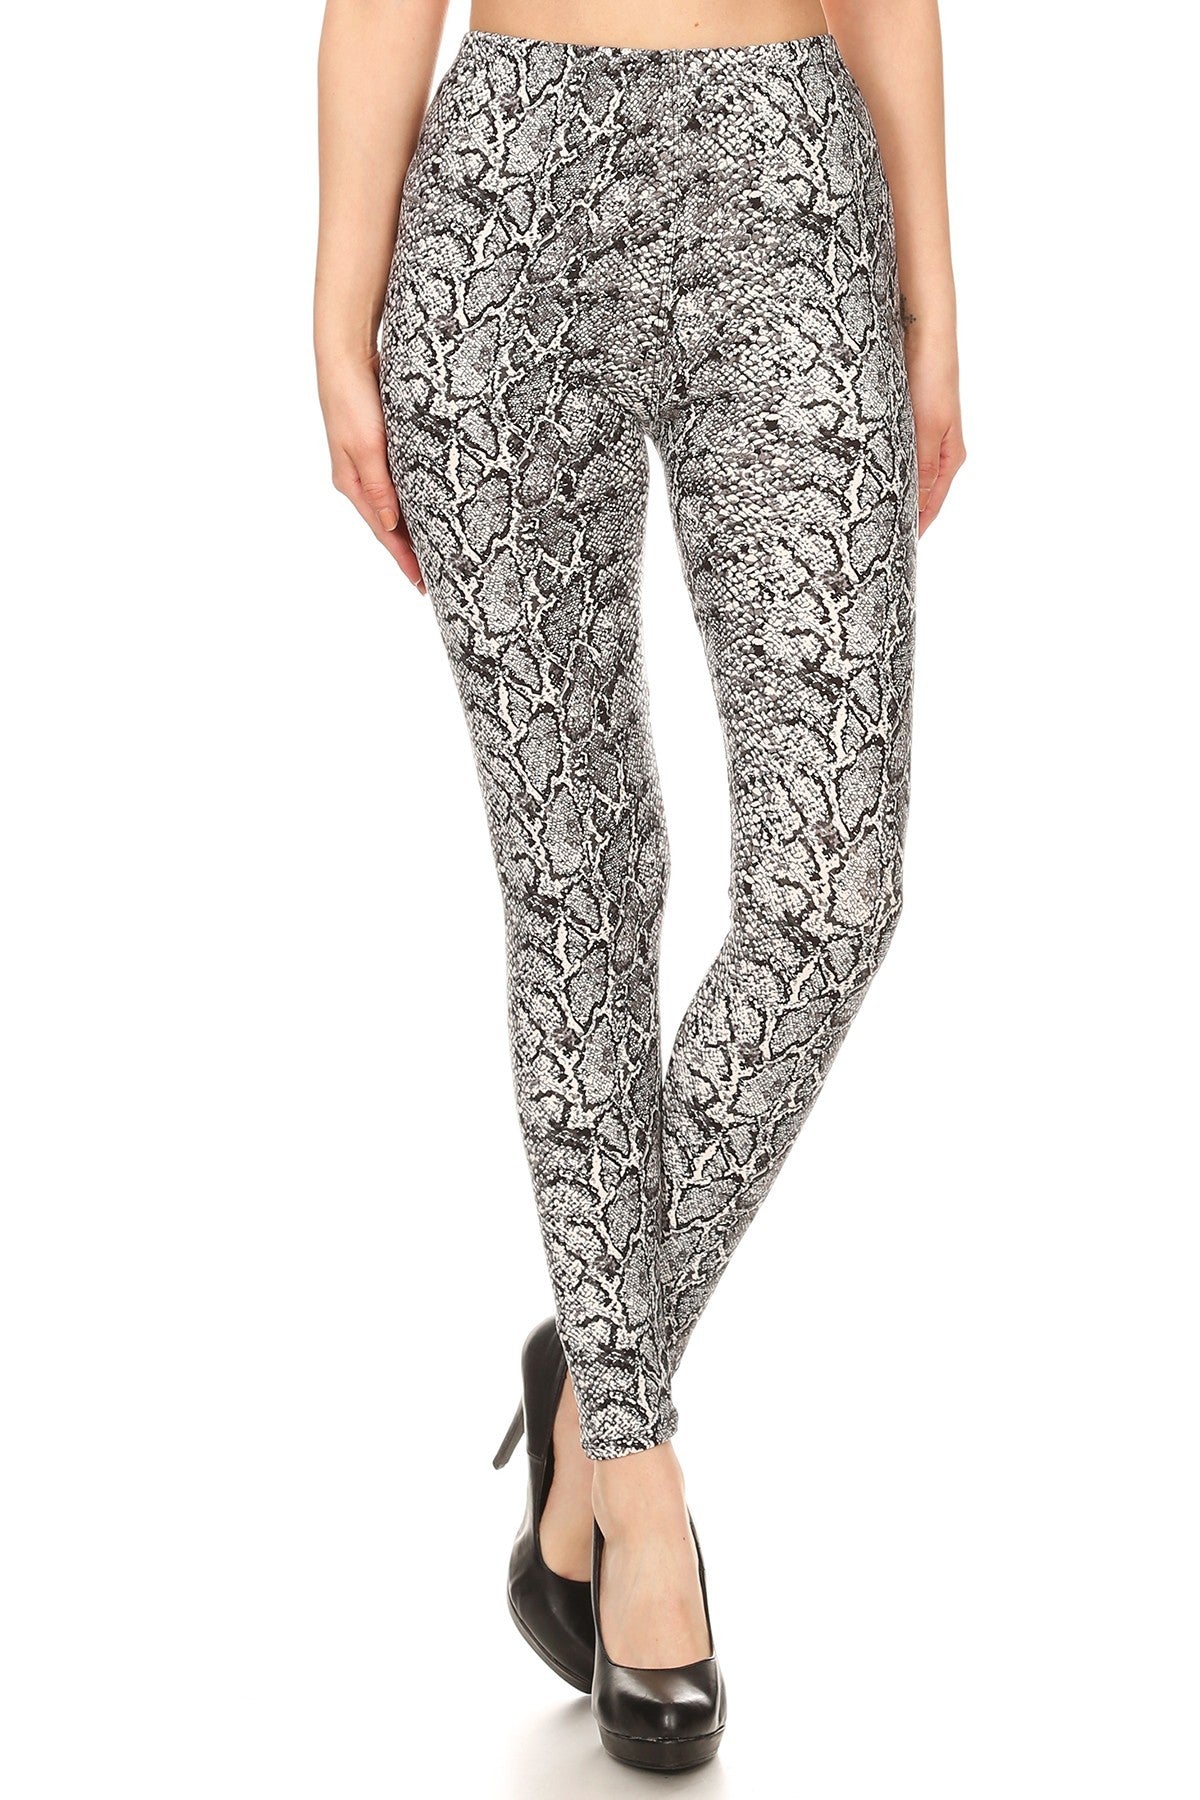 Snakeskin Print, Full Length, High Waisted Leggings In A Fitted Style With An Elastic Waistband - Love It Clothing